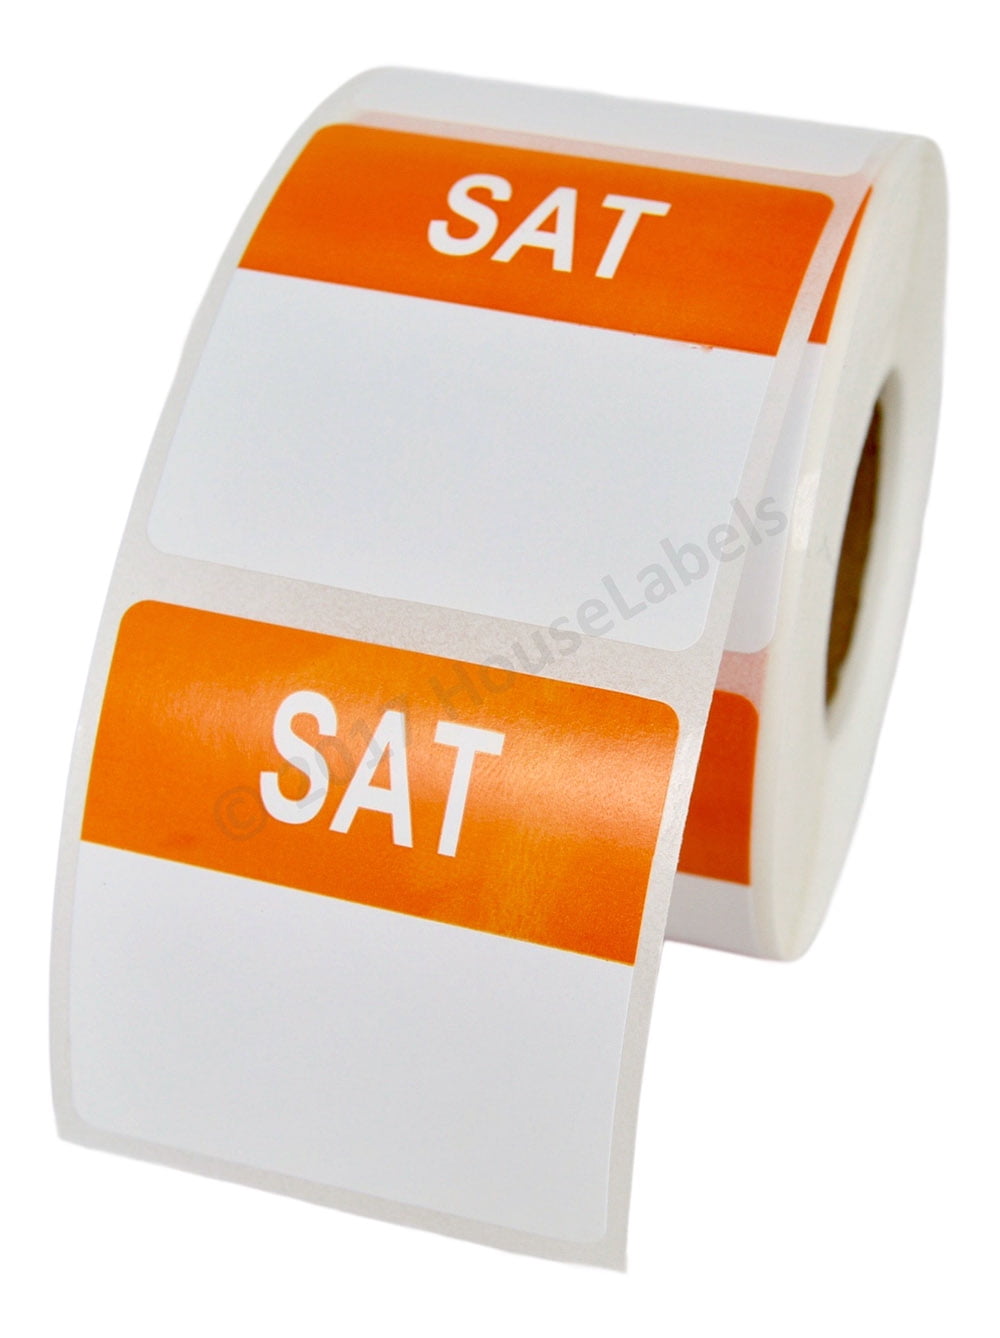 6 Rolls of Saturday Day of the Week Labels 500 labels/roll, 40mmx40mm BPA Free